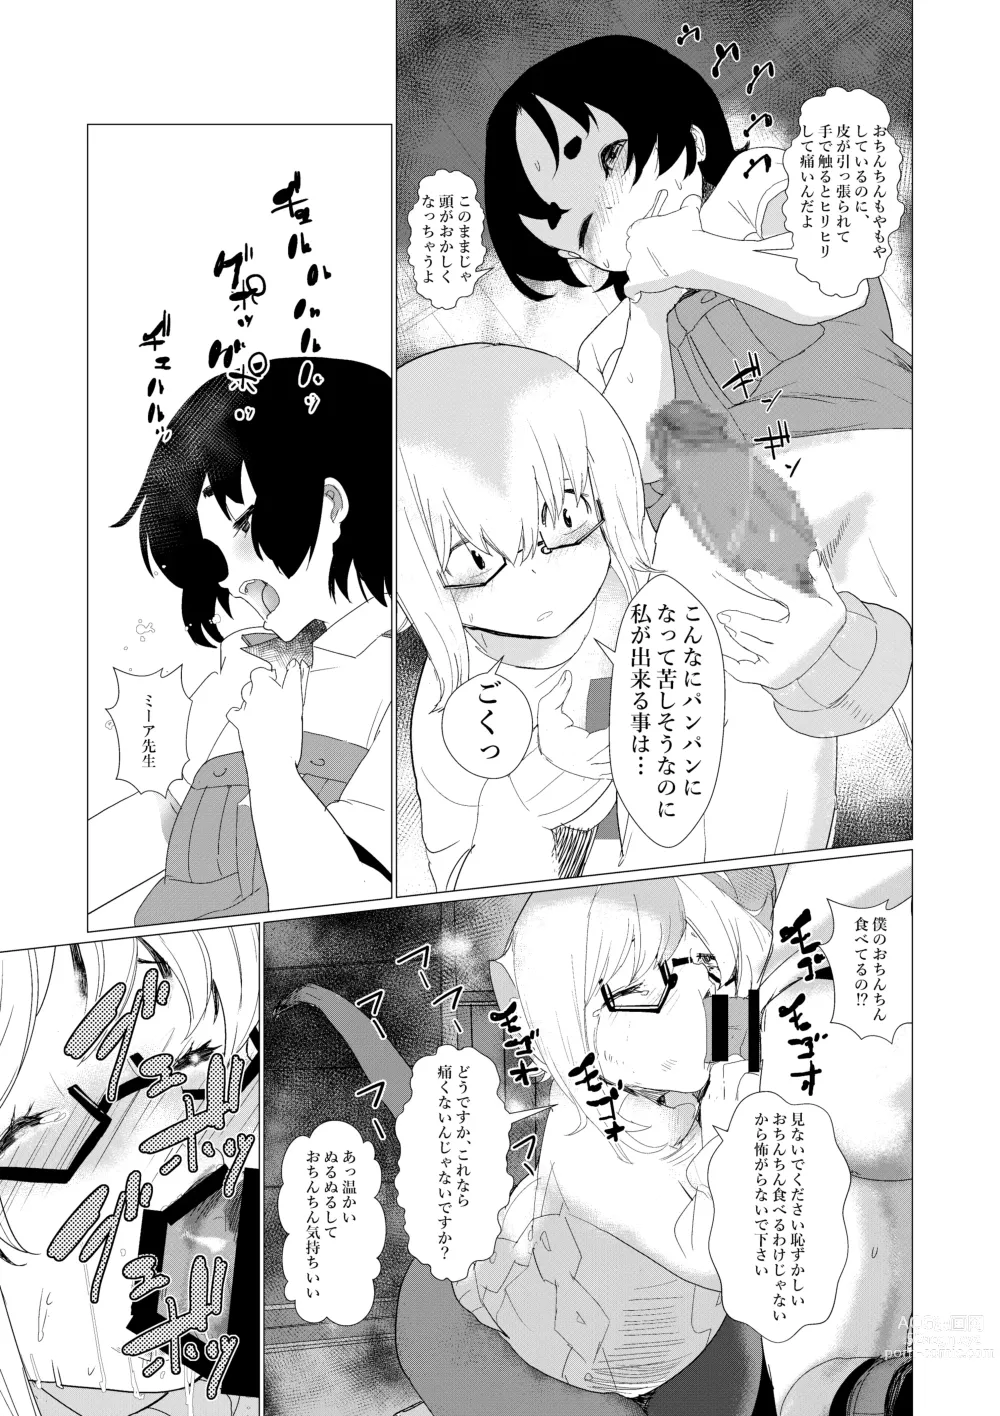 Page 11 of doujinshi Sensei... My Penis is Going Crazy